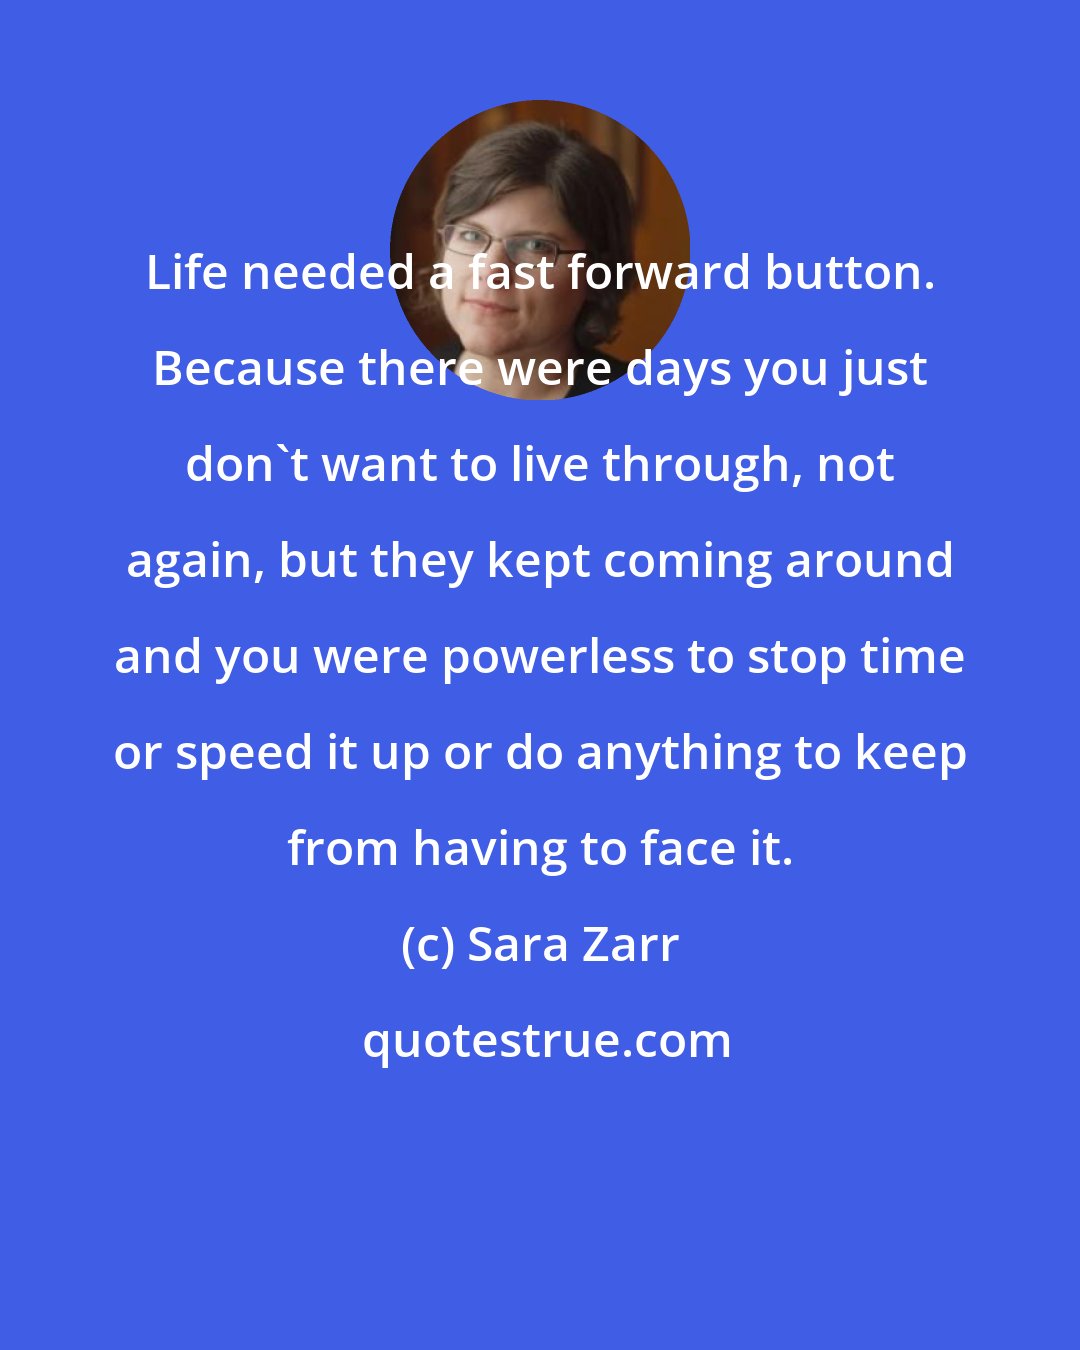 Sara Zarr: Life needed a fast forward button. Because there were days you just don't want to live through, not again, but they kept coming around and you were powerless to stop time or speed it up or do anything to keep from having to face it.